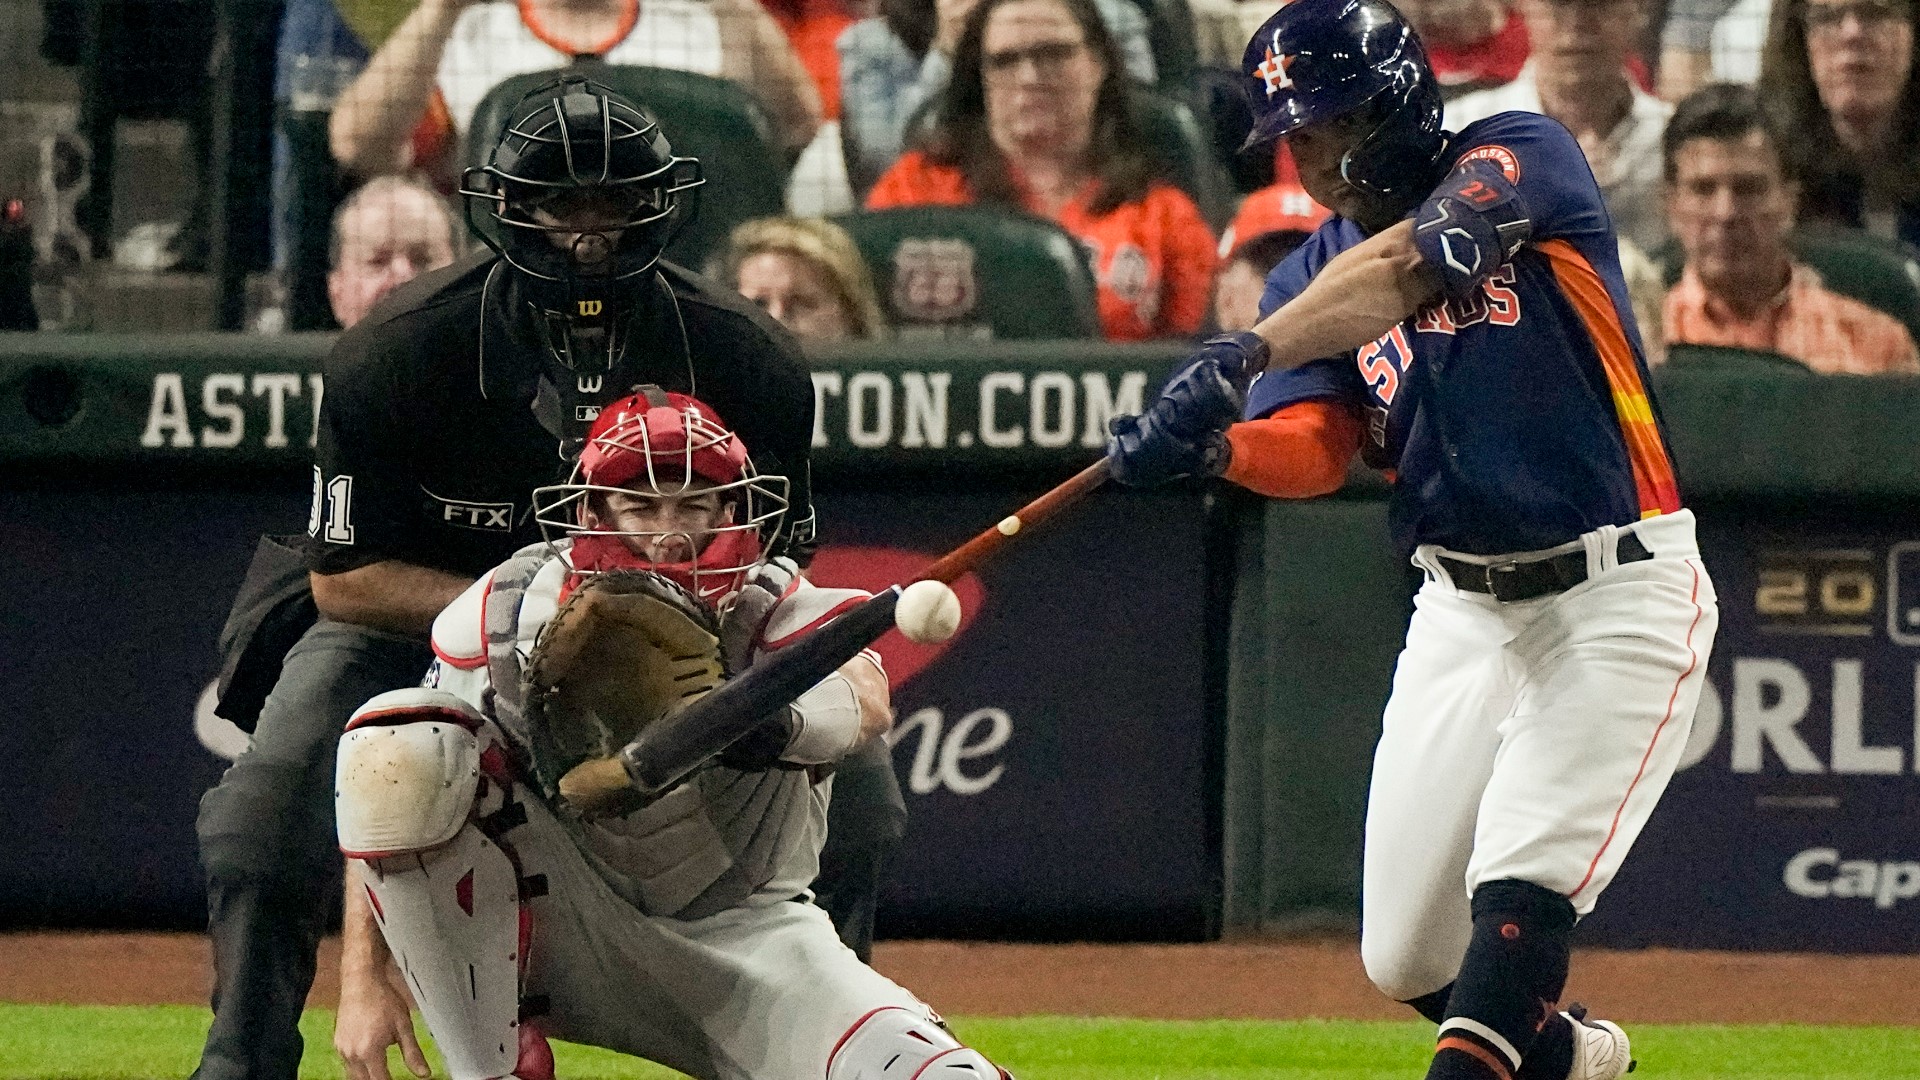 World Series: Tied 1-all, Astros-Phils resume after rainout